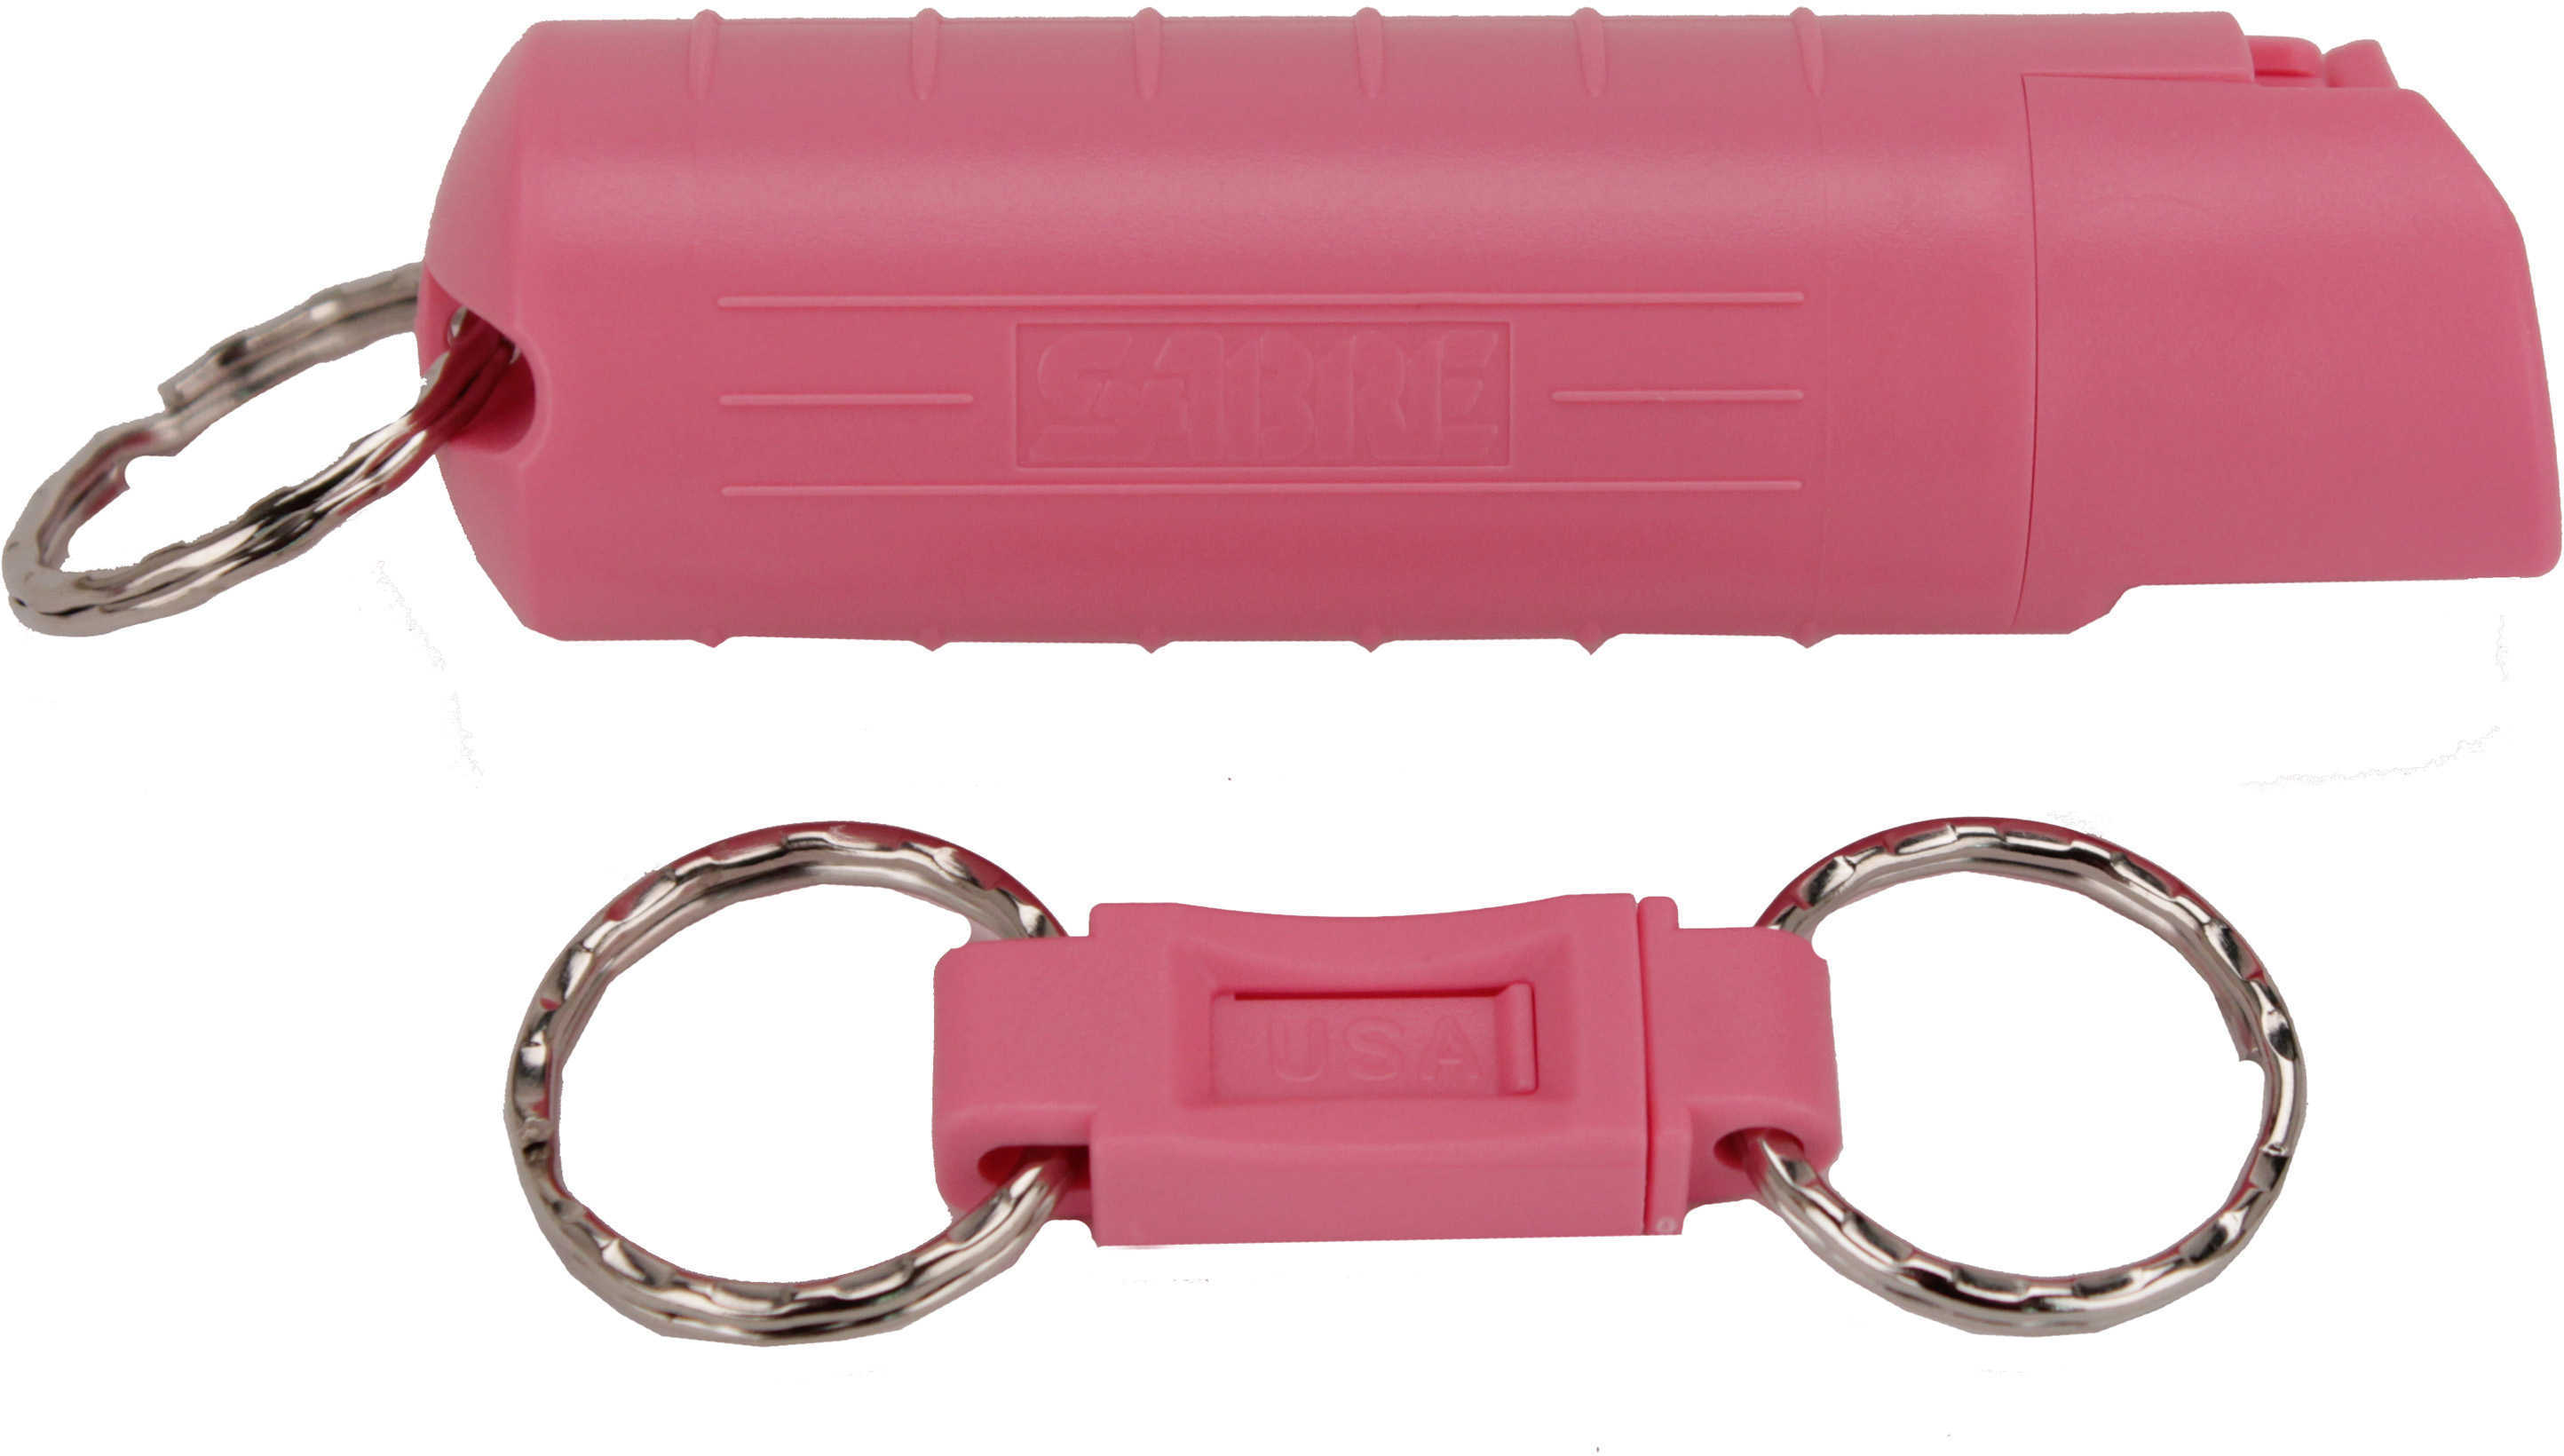 Sabre Red Pepper Spray 1/2 Oz Pink with Quick Release Key Ring National Breast Cancer Foundation HCNBCF01